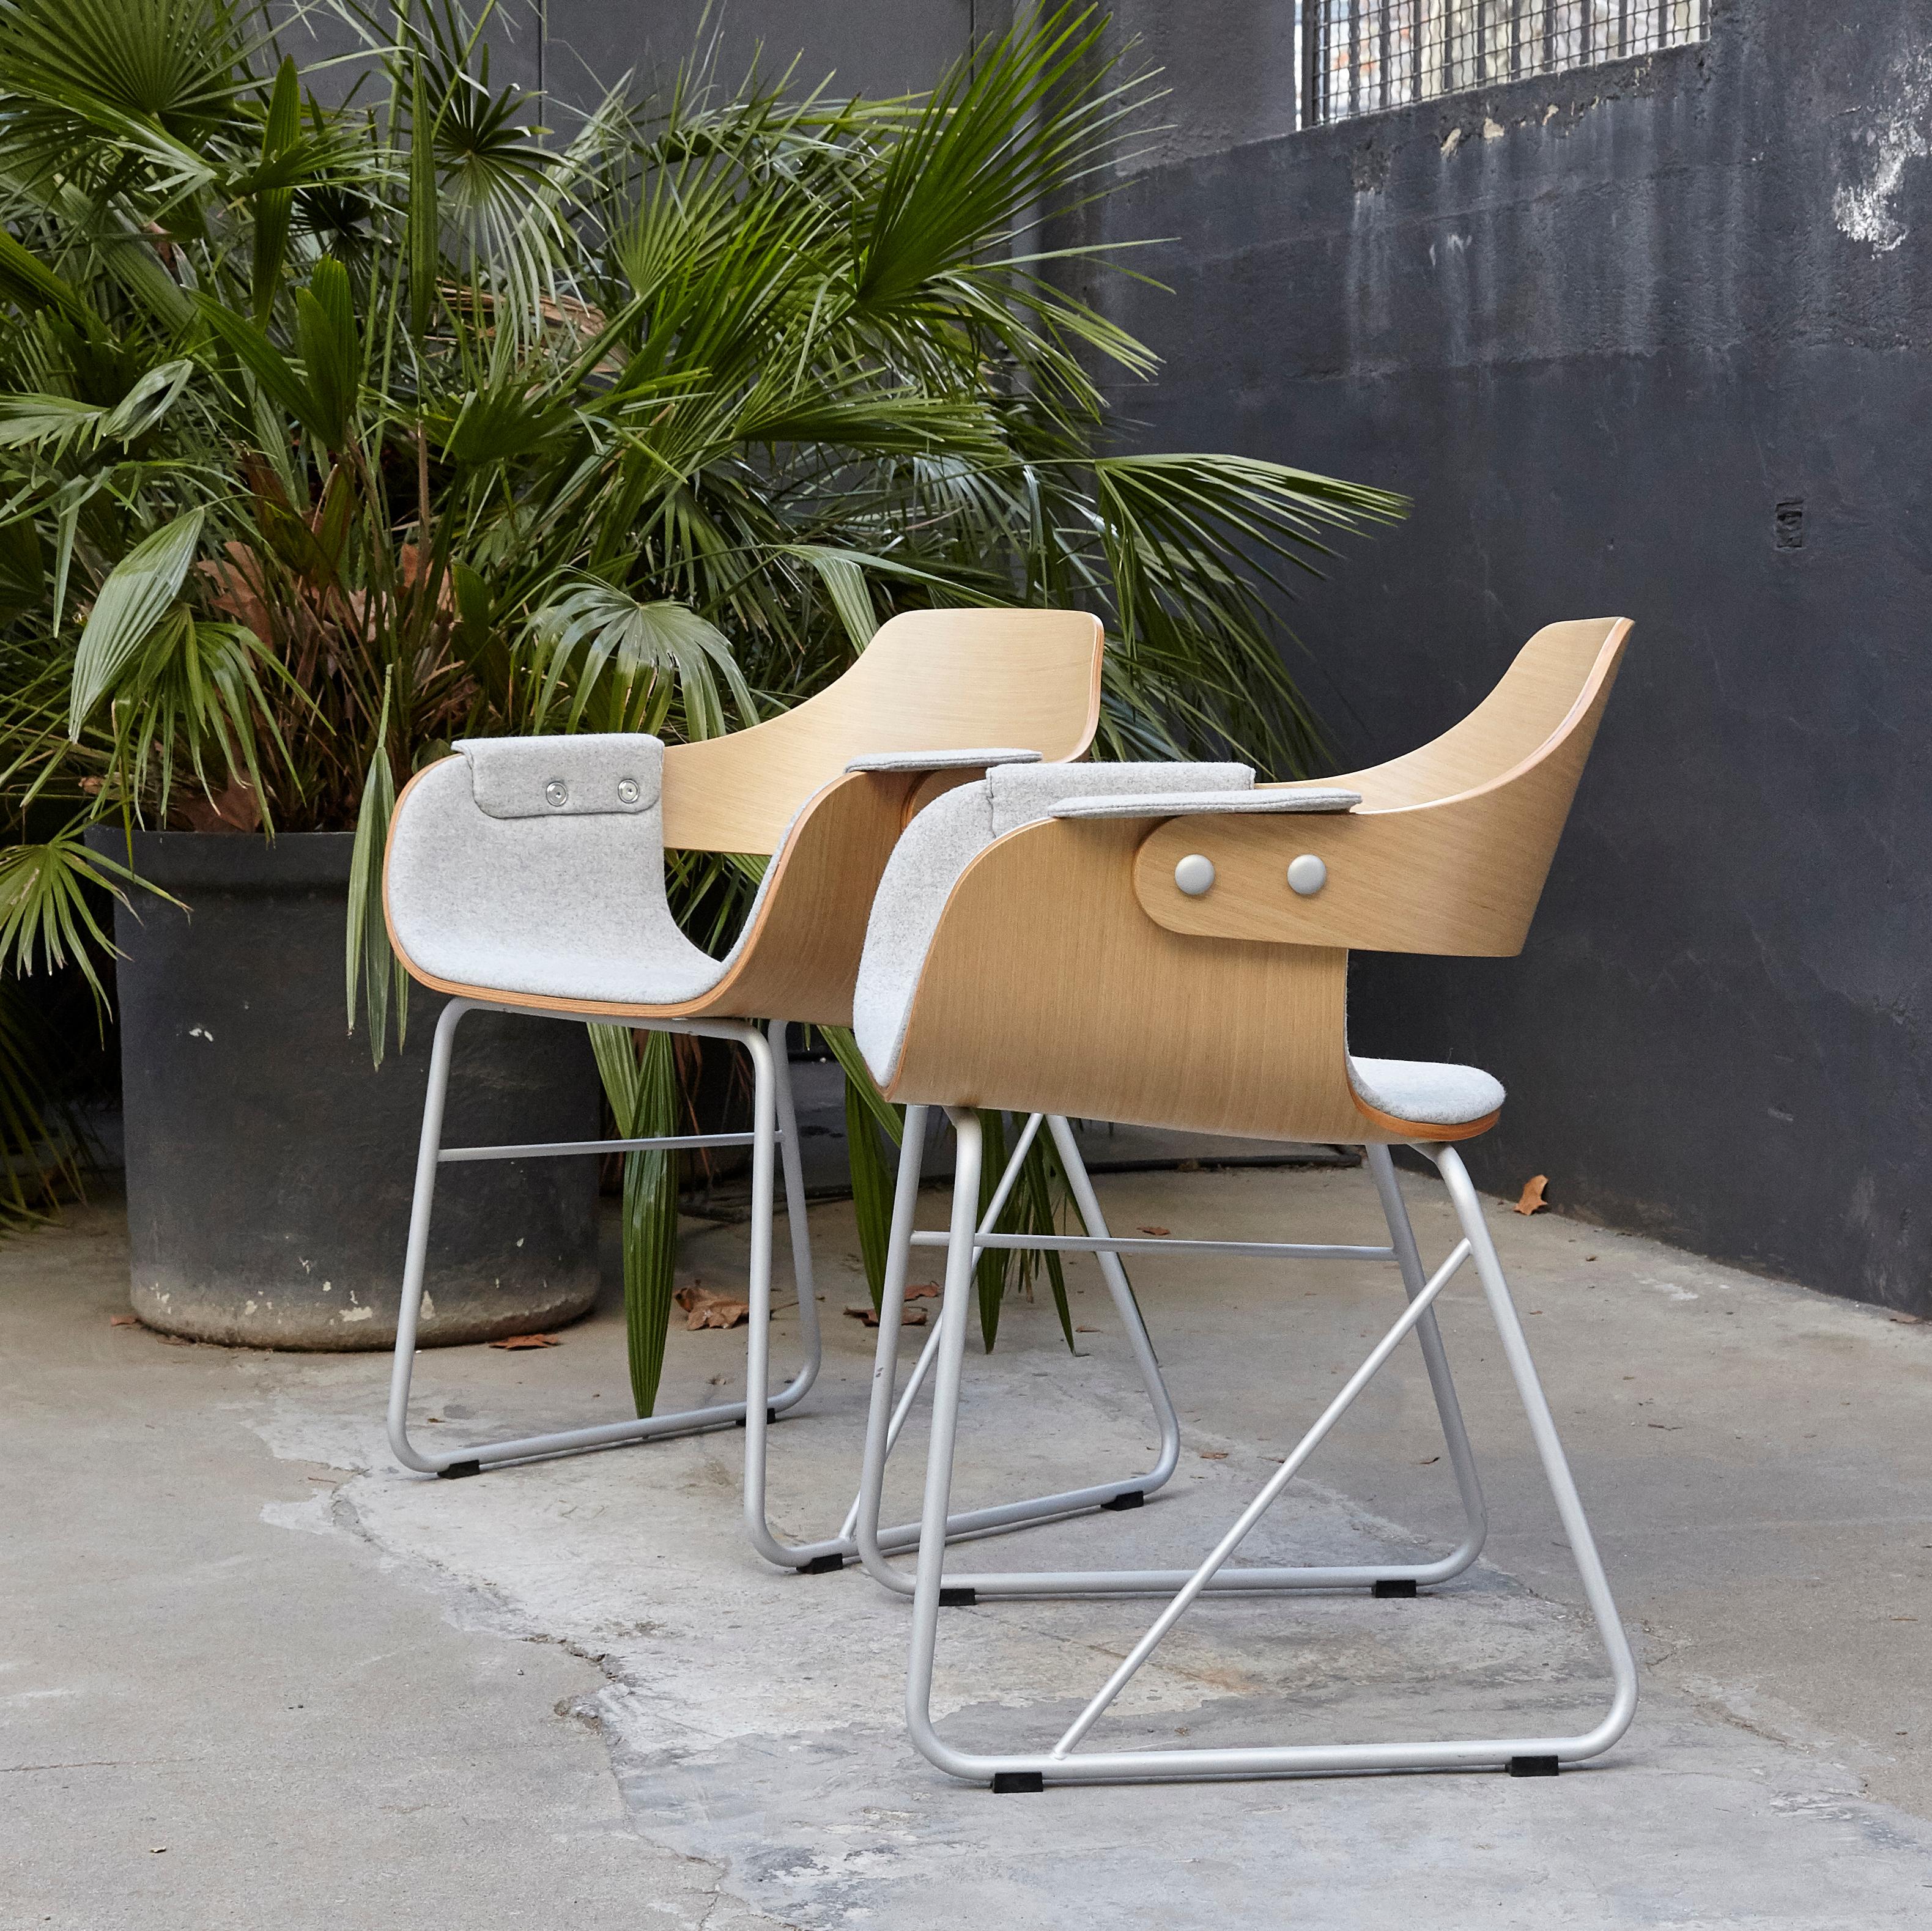 Steel Pair of Jaime Hayon Contemporary Upholstered Wood Chair Showtime by BD Barcelona